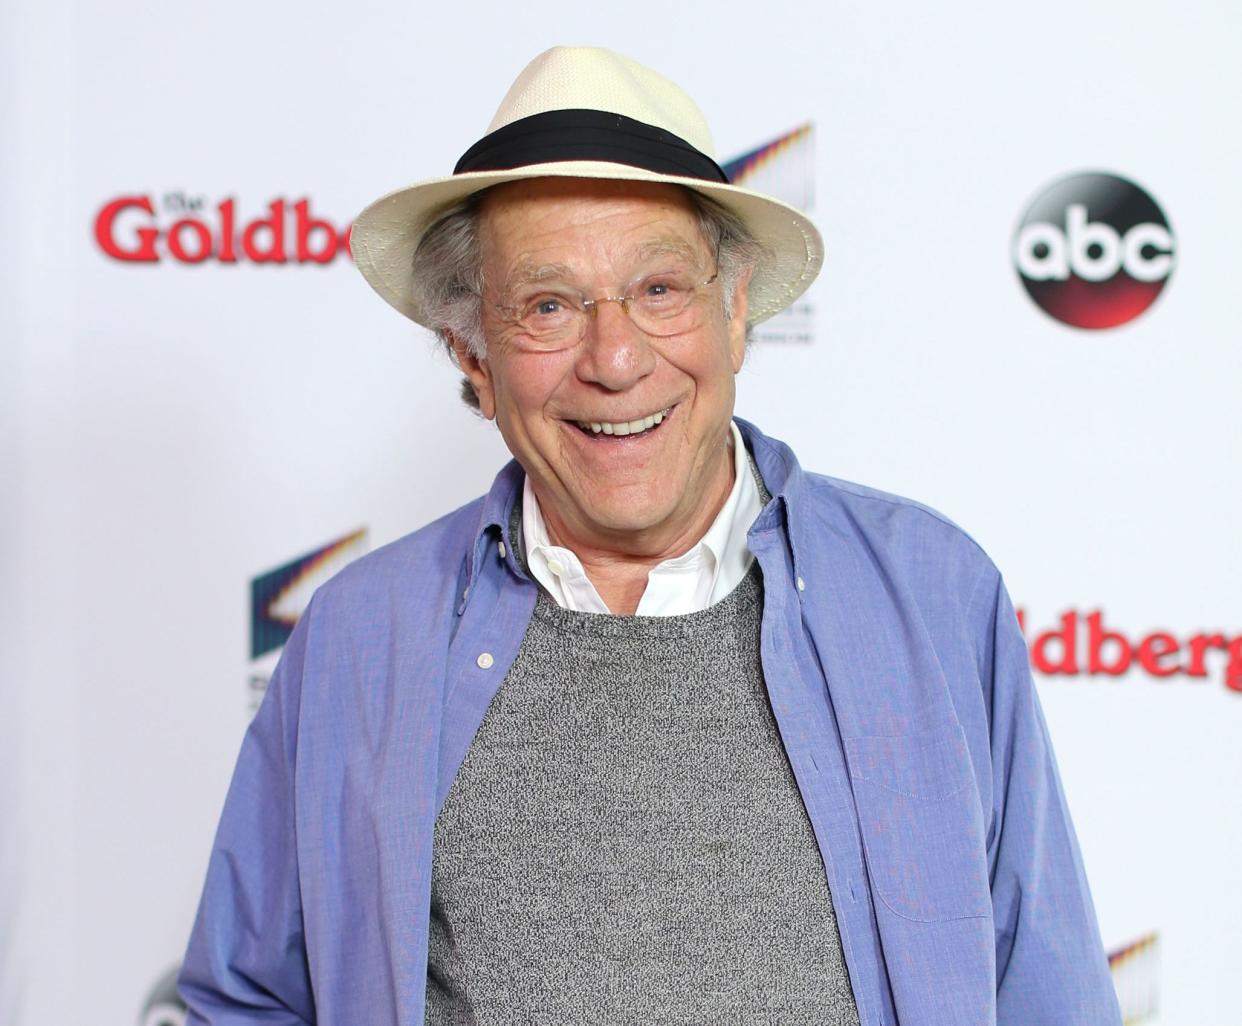 Actor George Segal attends 'The Goldbergs' press event on Sept. 3, 2014 in Glendale, Calif.  